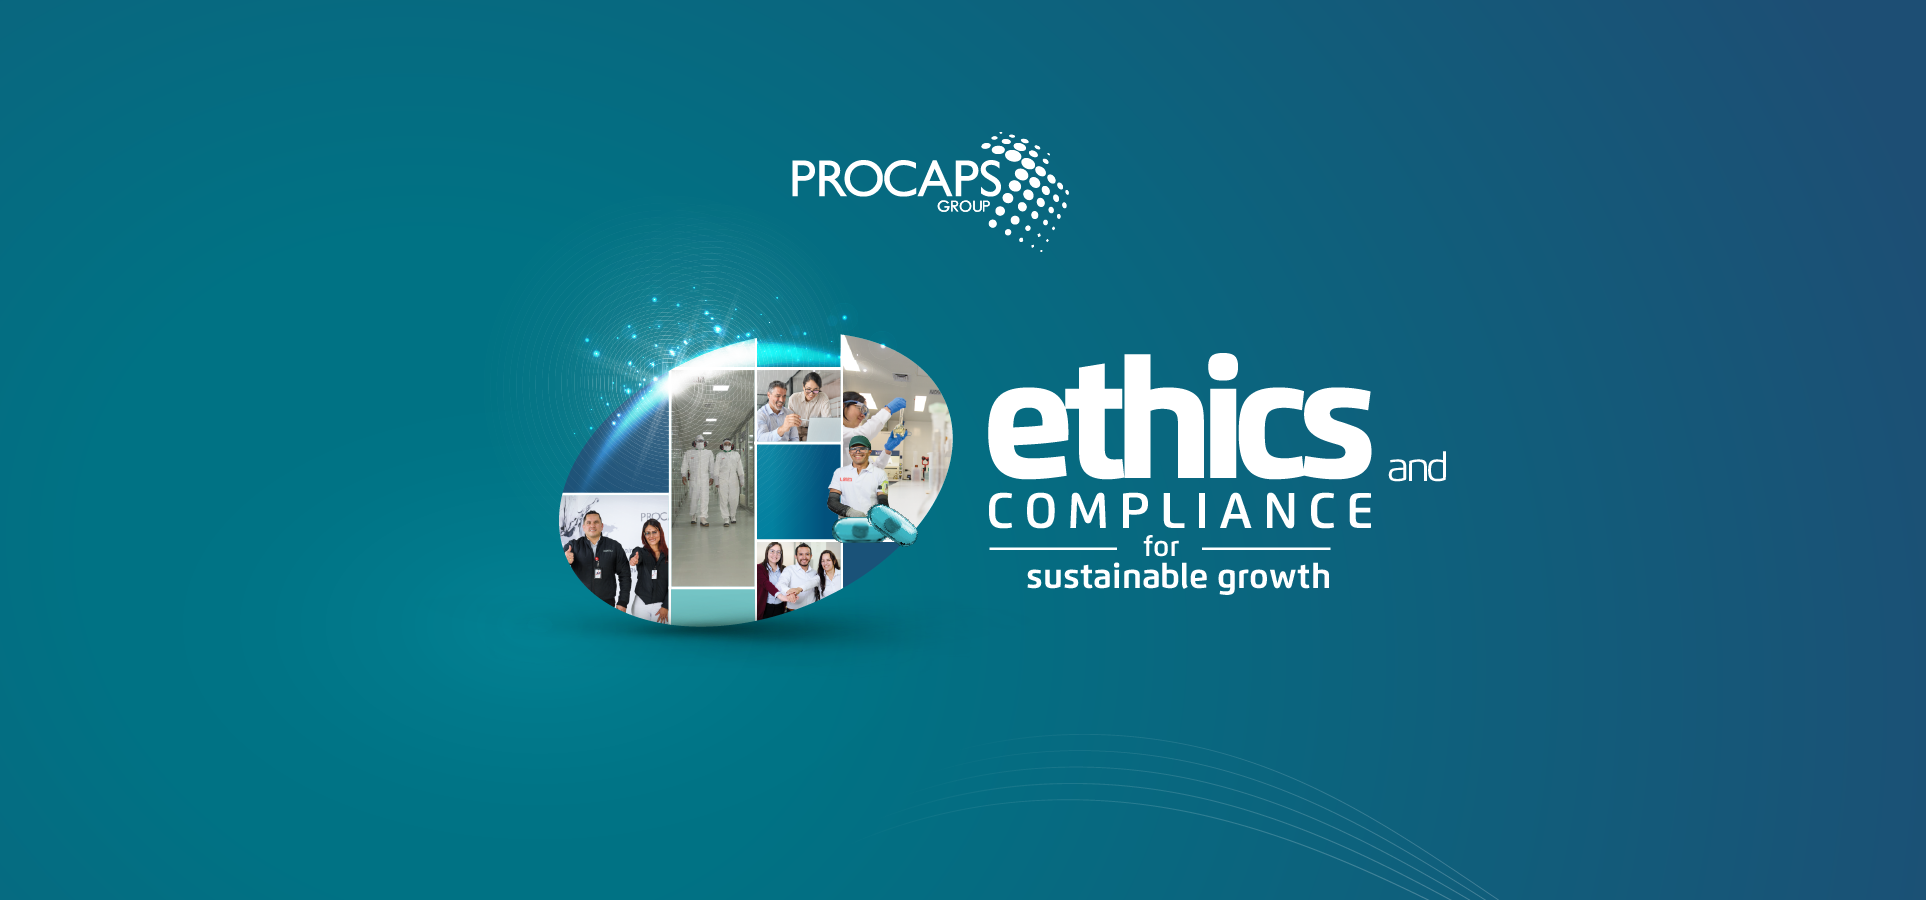 Ethics and Compliance for sustainable growth.